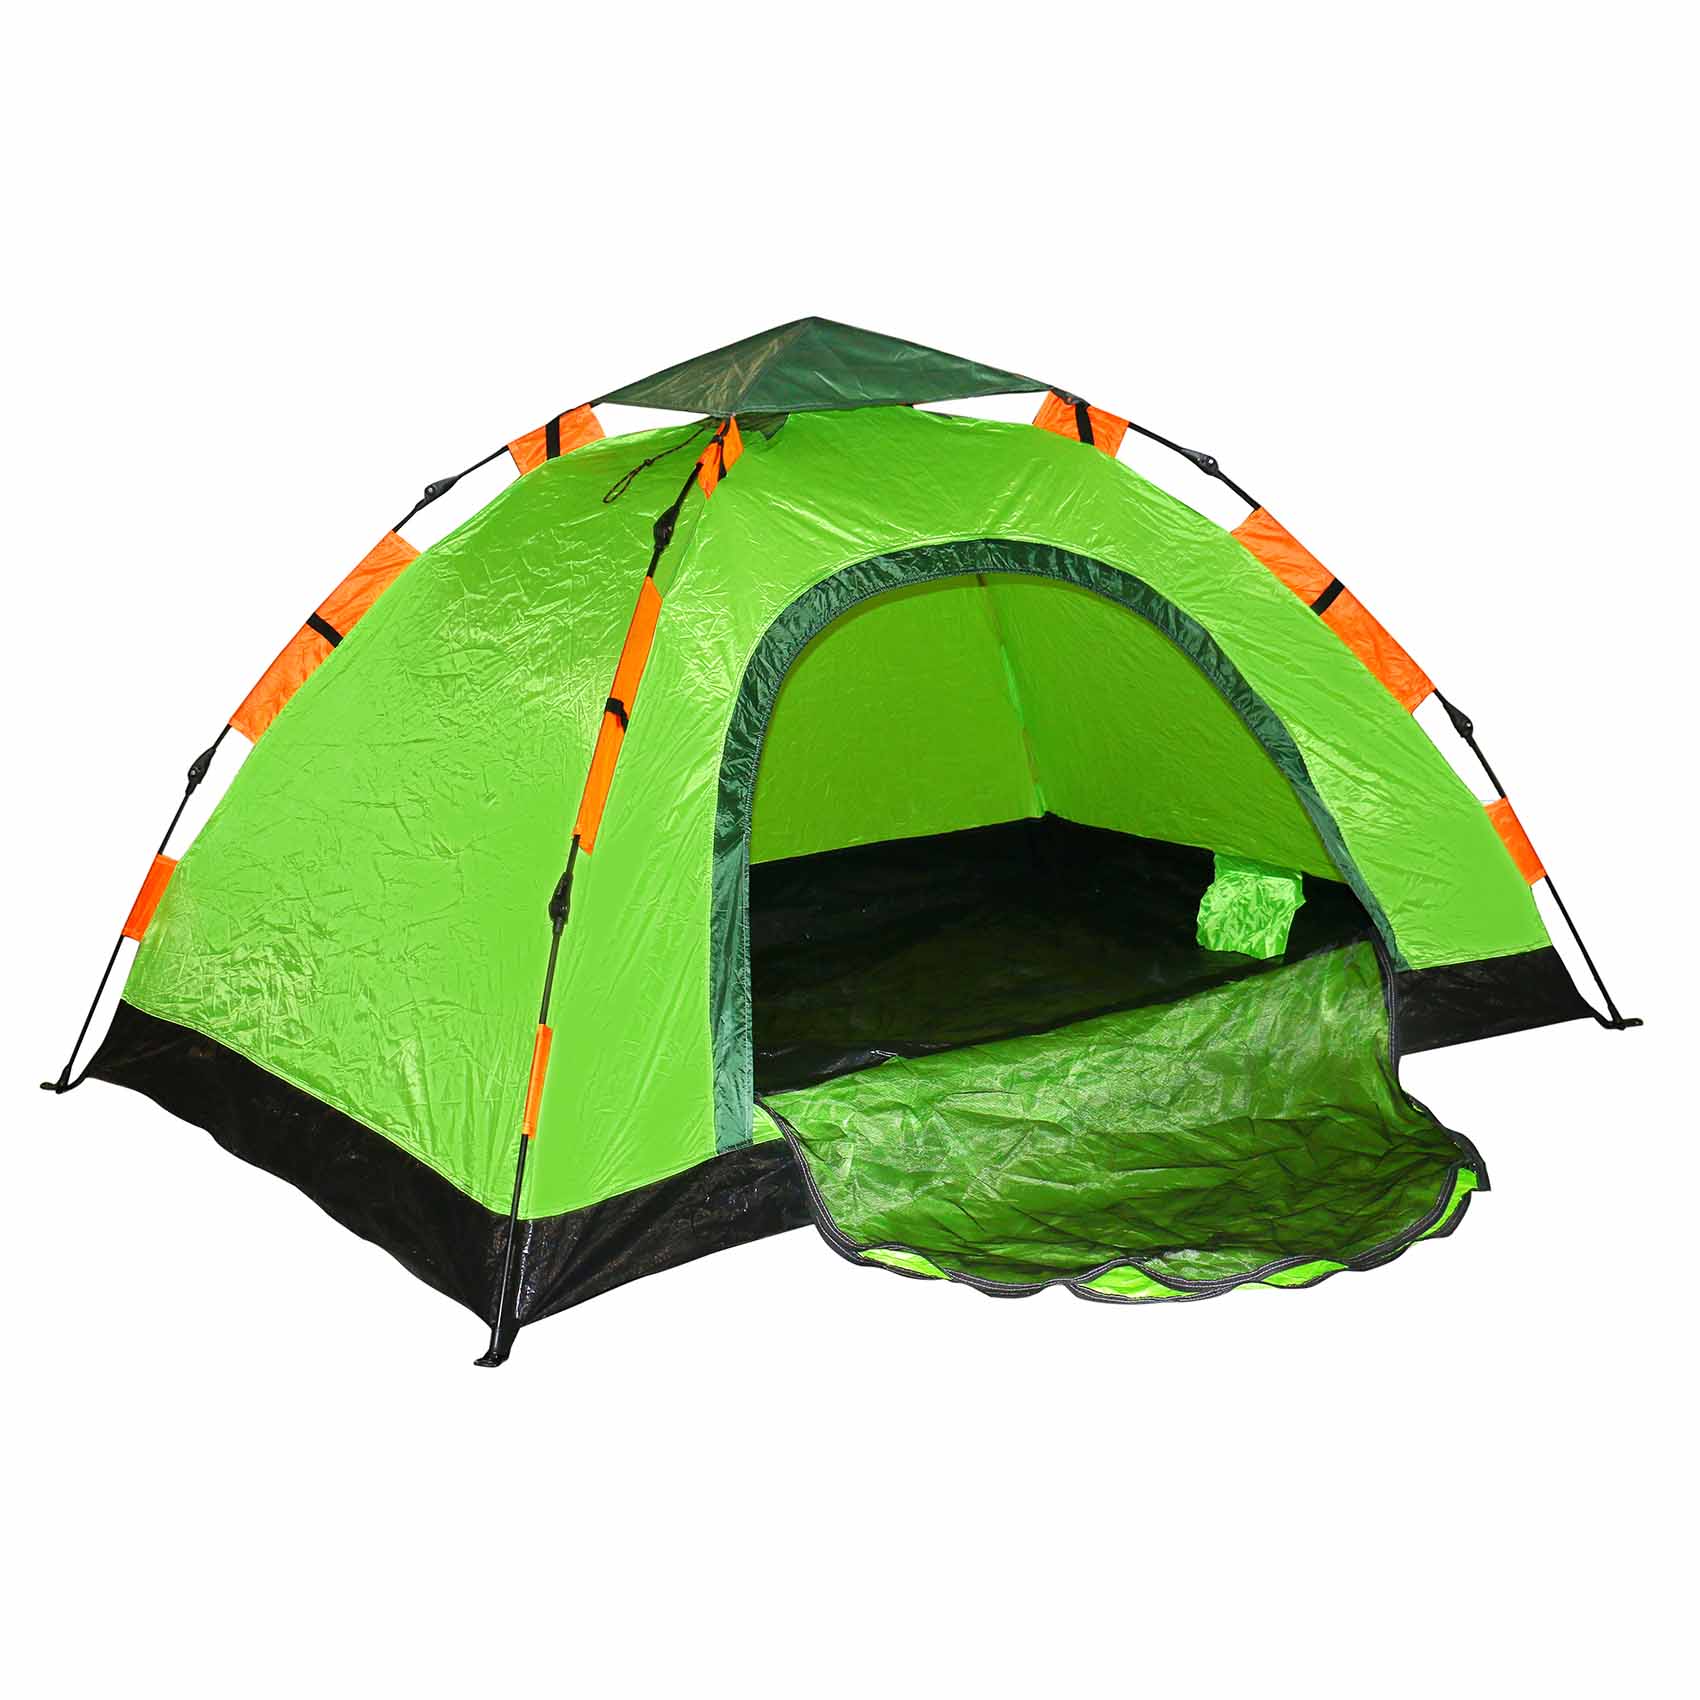 CAMPMATE AUTOMATIC TENT 2 PERSON with mosquito net and zip window 190X140X105CM ZRT075